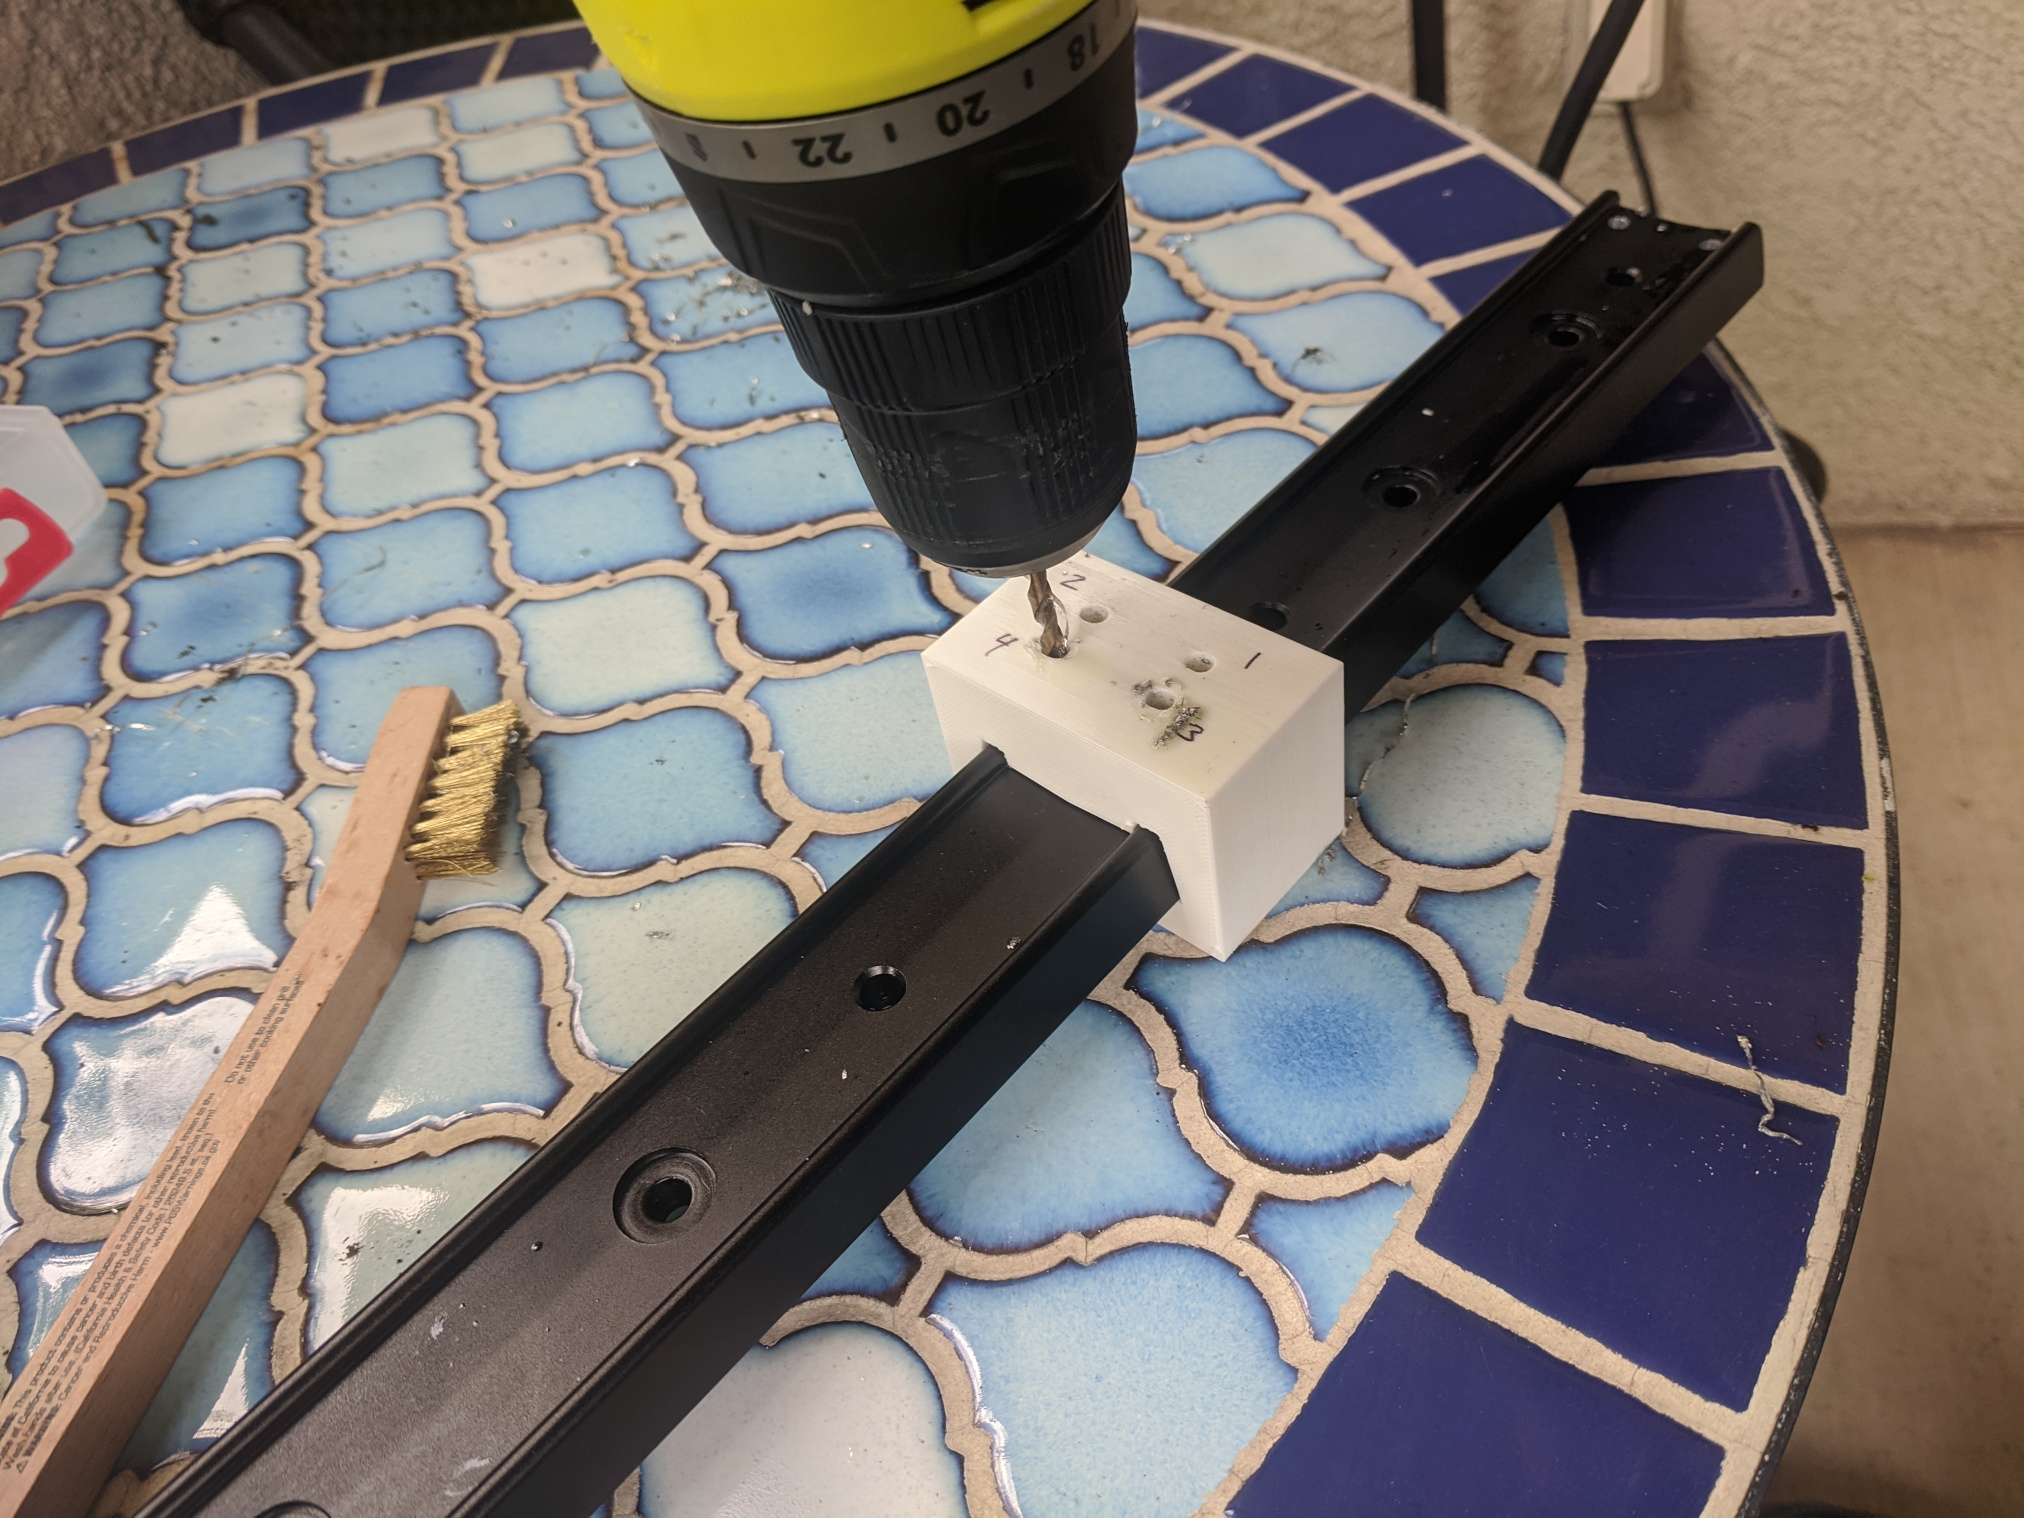 3D printed jig for drilling the dovetail bracket